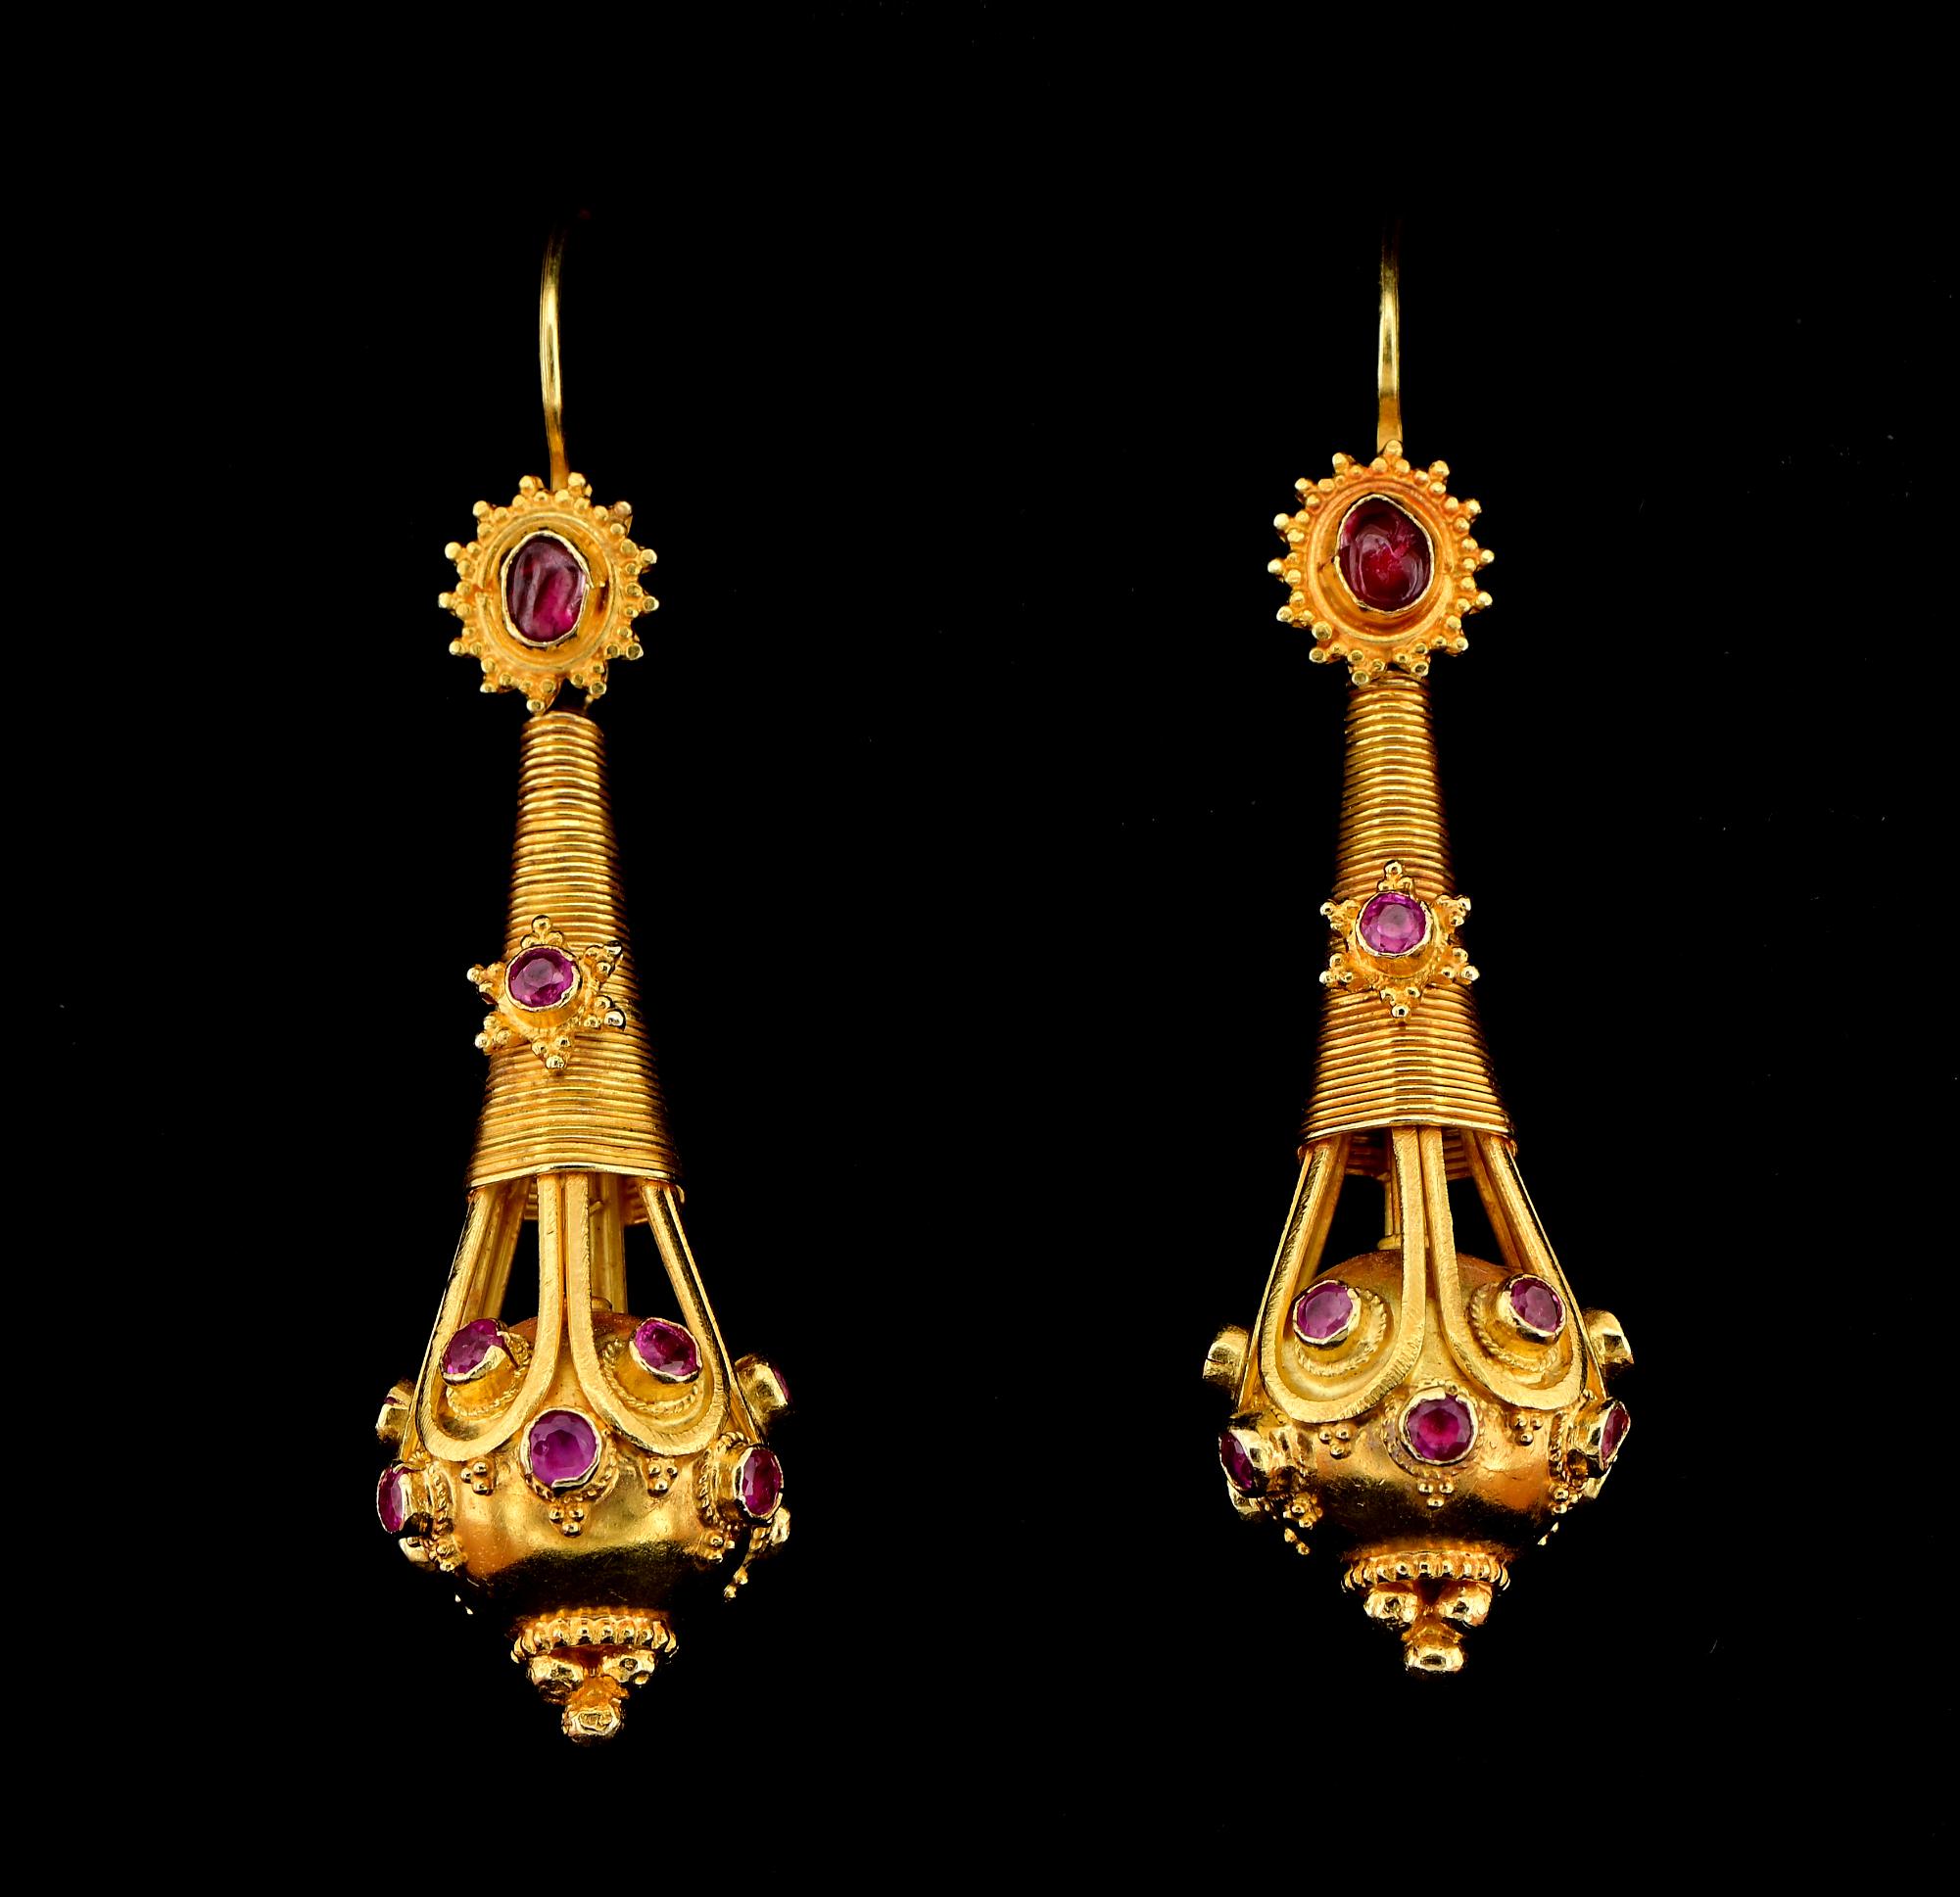 Journey to the Past
A spectacular pair of 19th Century Etruscan Revival earrings, 1860 ca
They boast the magnificent workmanship of the era, solid 18 KT gold substantial weight of 15.8 grams – so not much delicate to wear as can be the more common